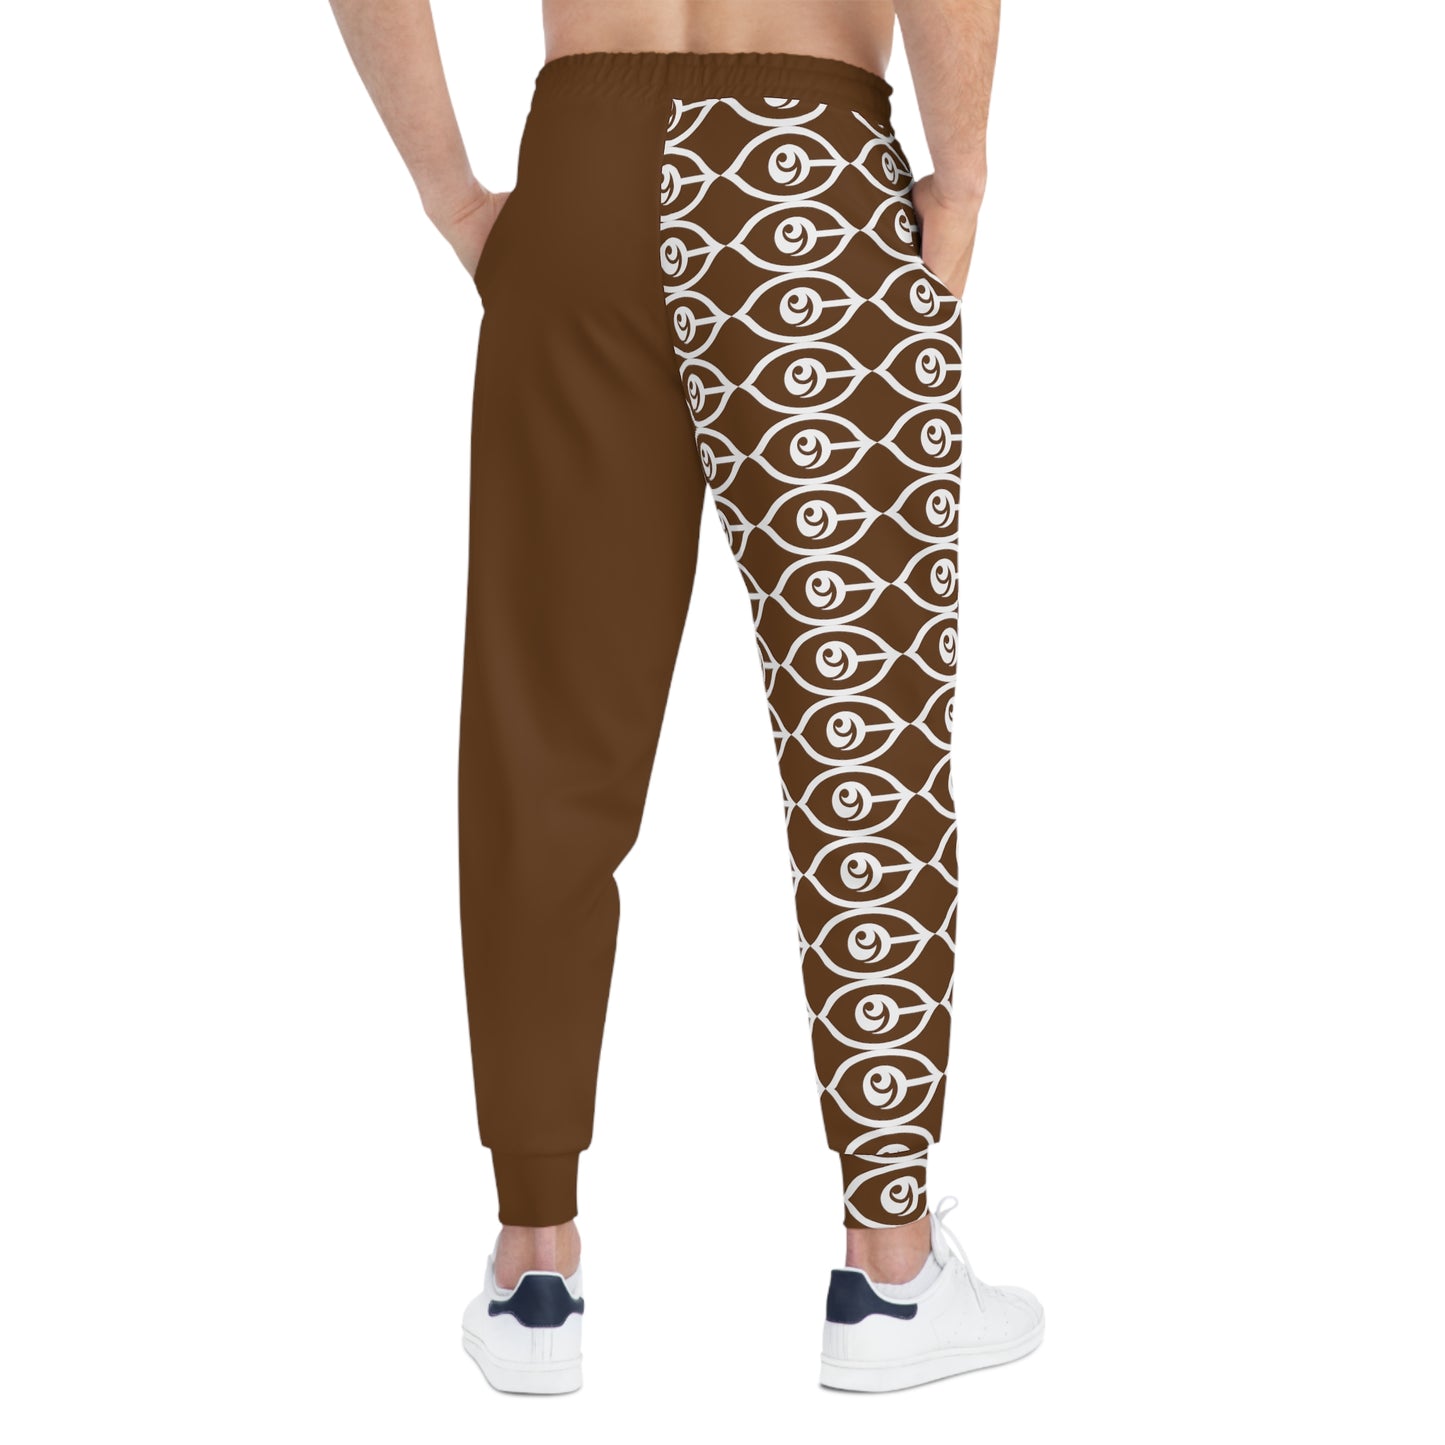 CyVision Peaceful Warrior Athletic Joggers